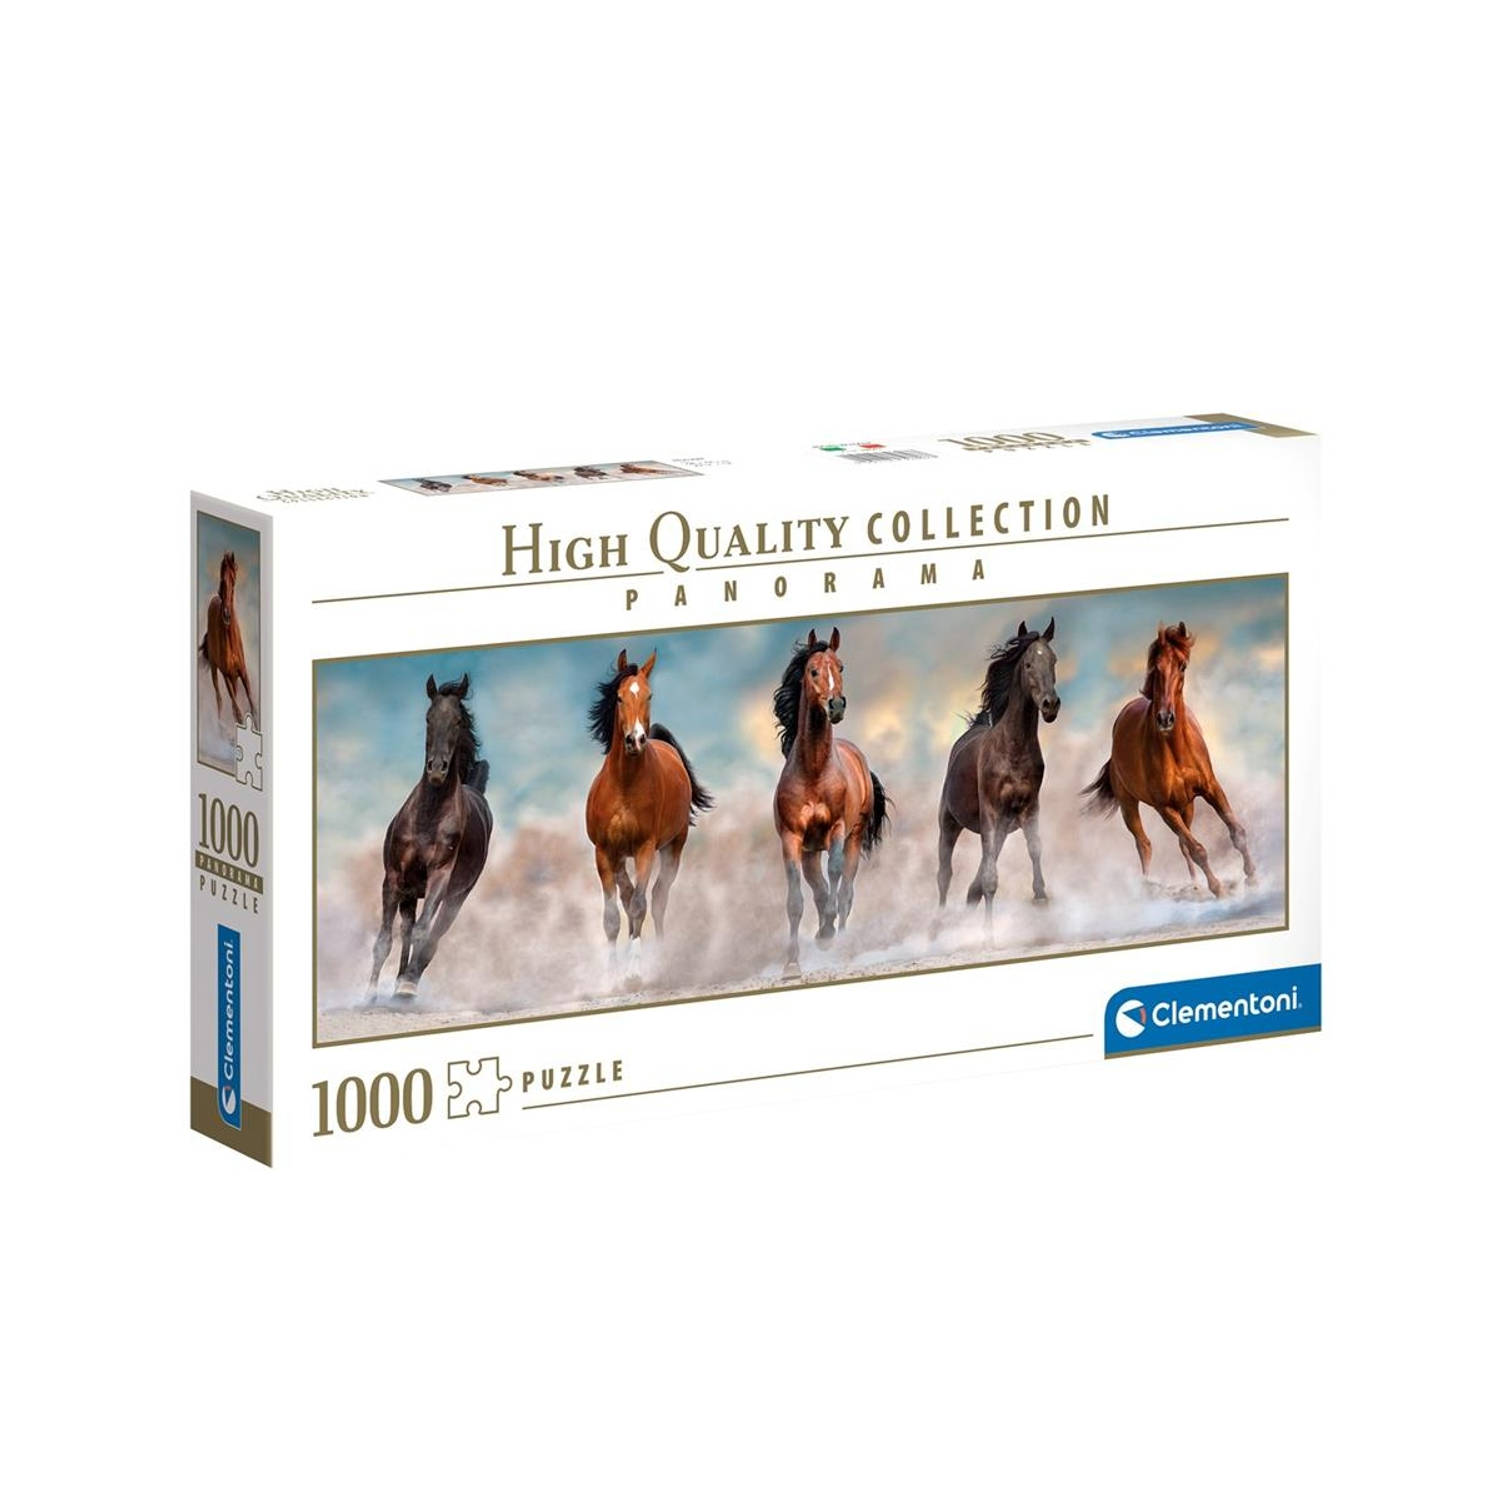 Clementoni Puzzel Panorama High Quality Paarden (1000)